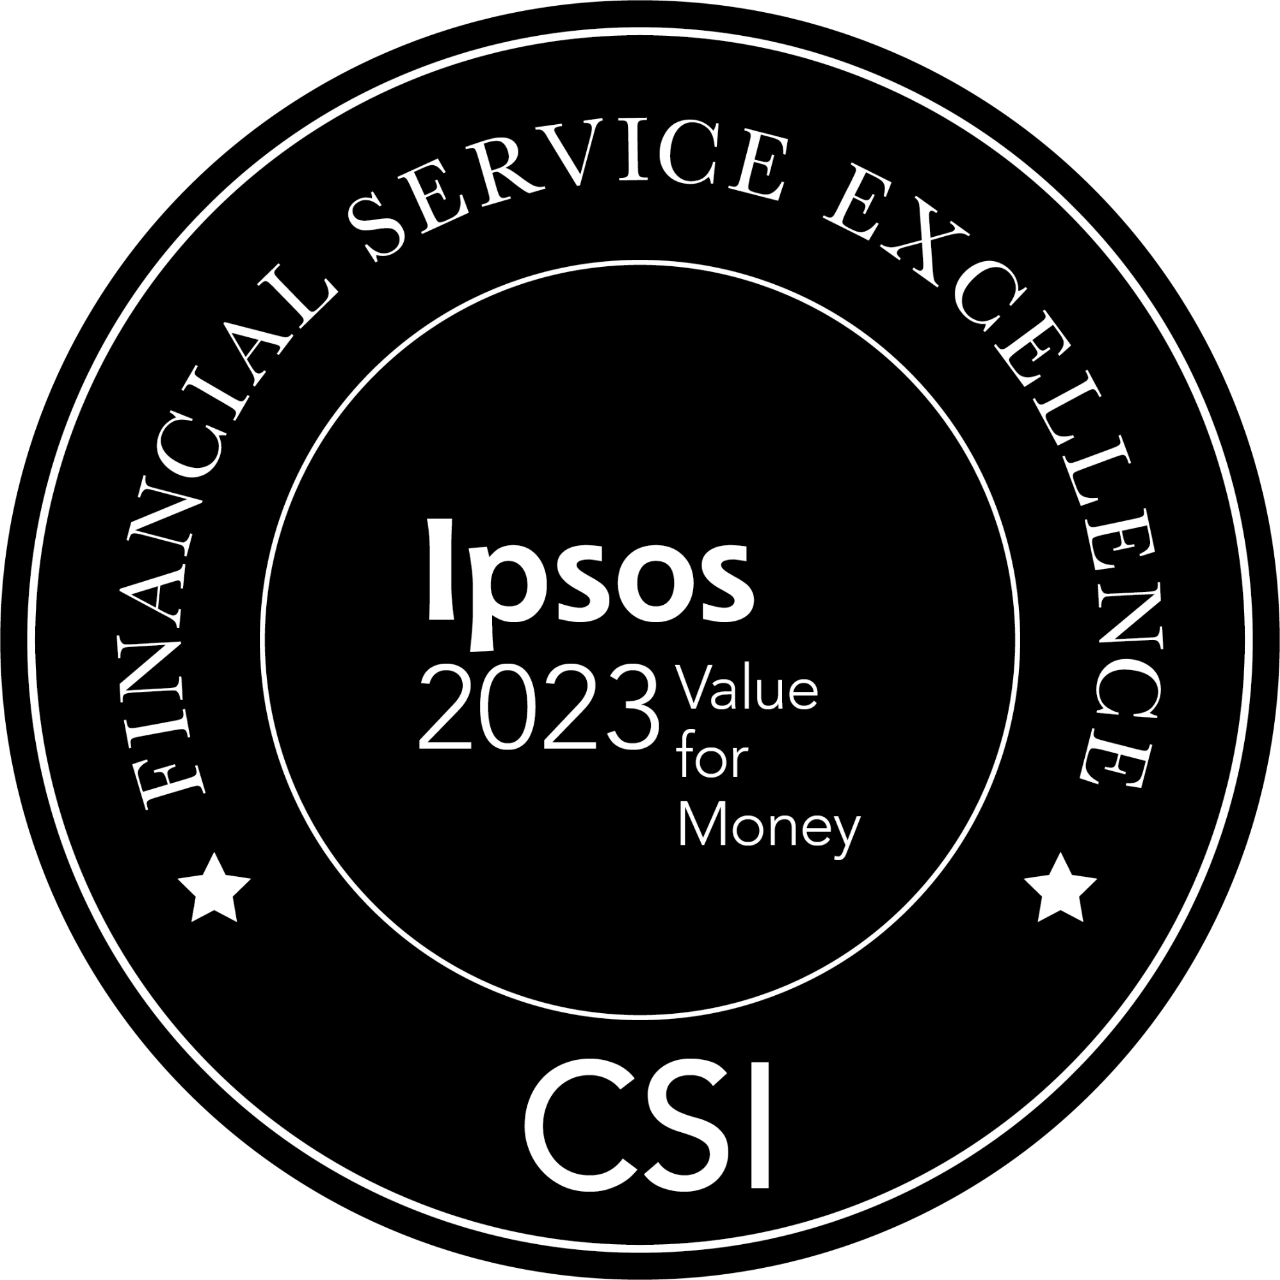 Ipsos Financial Service Excellence Awards. 2023 Value for Money badge.